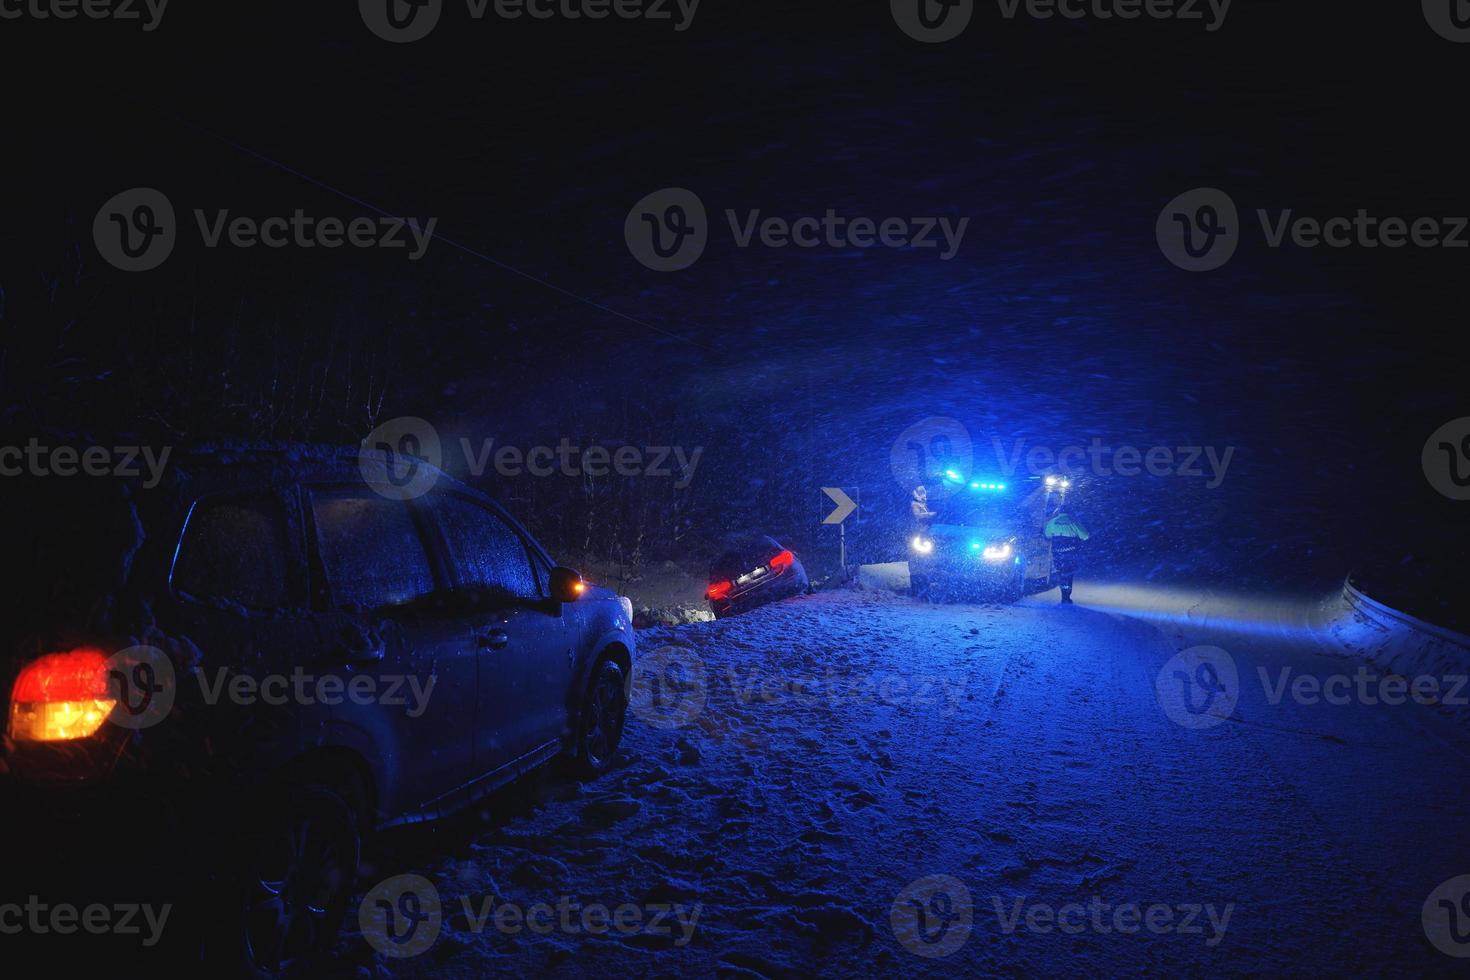 car accident on slippery winter road at night photo